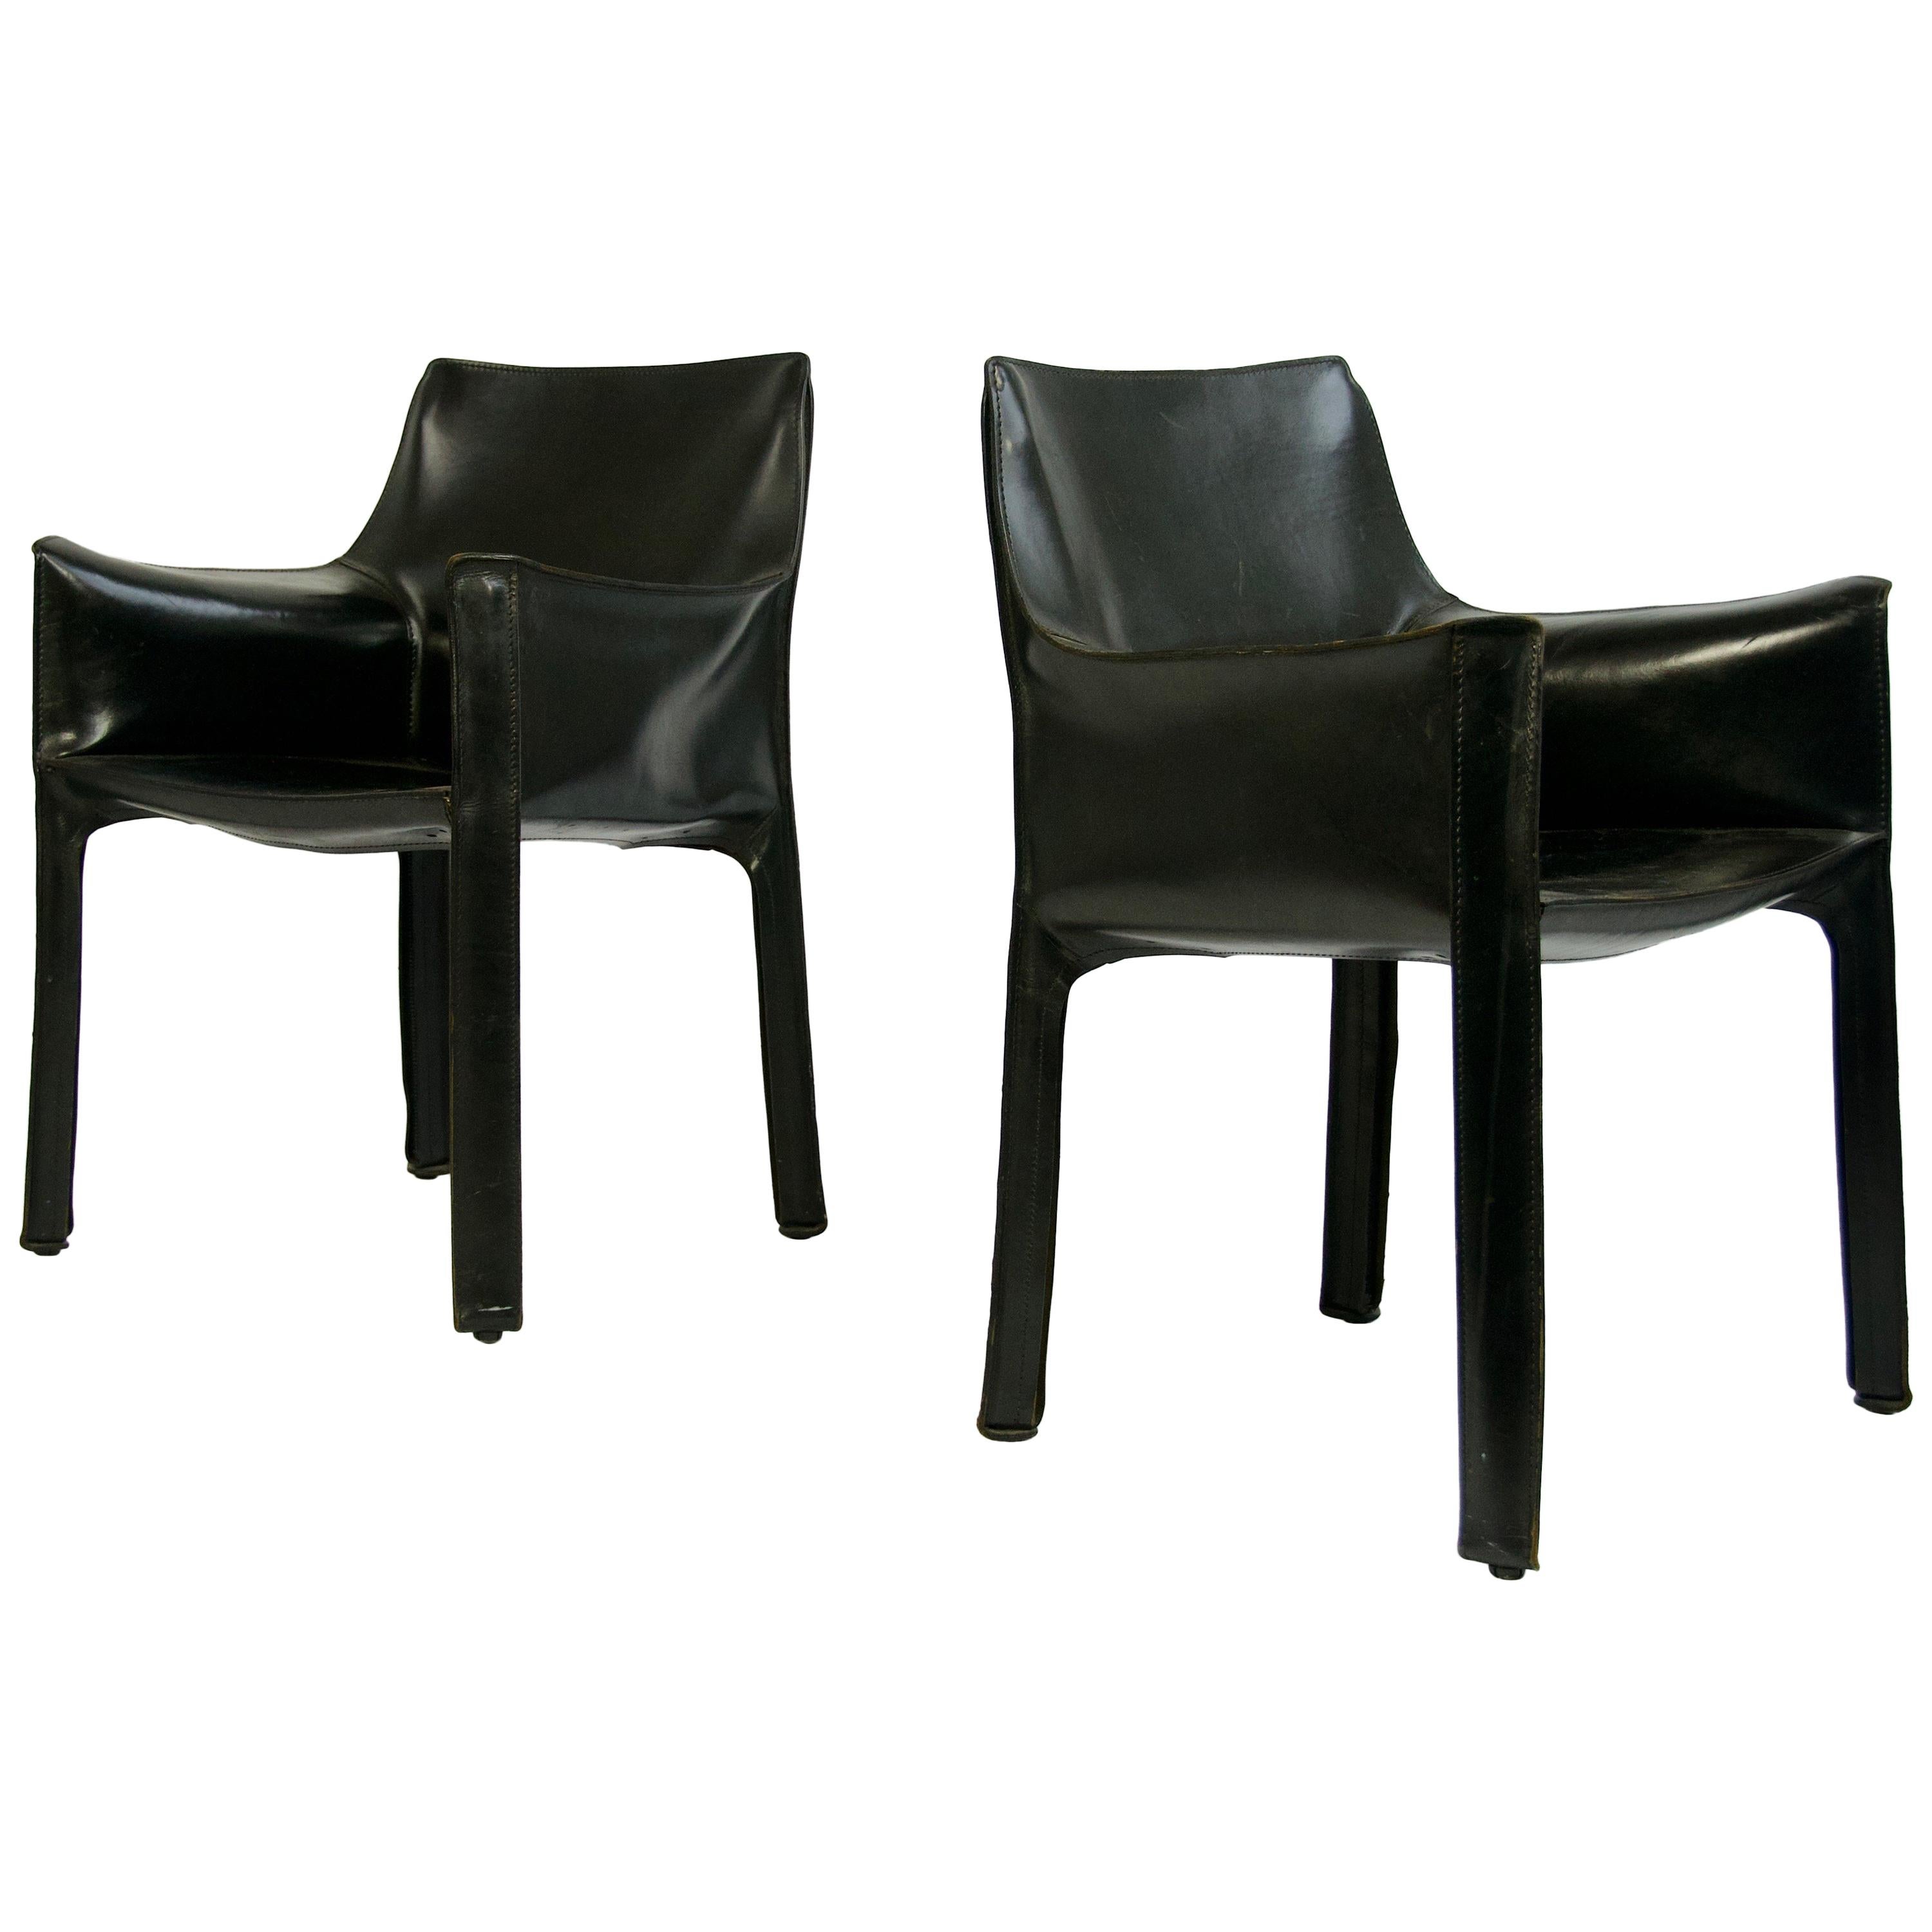 Pair of Black Leather "CAB" Chairs Designed by Mario Bellini